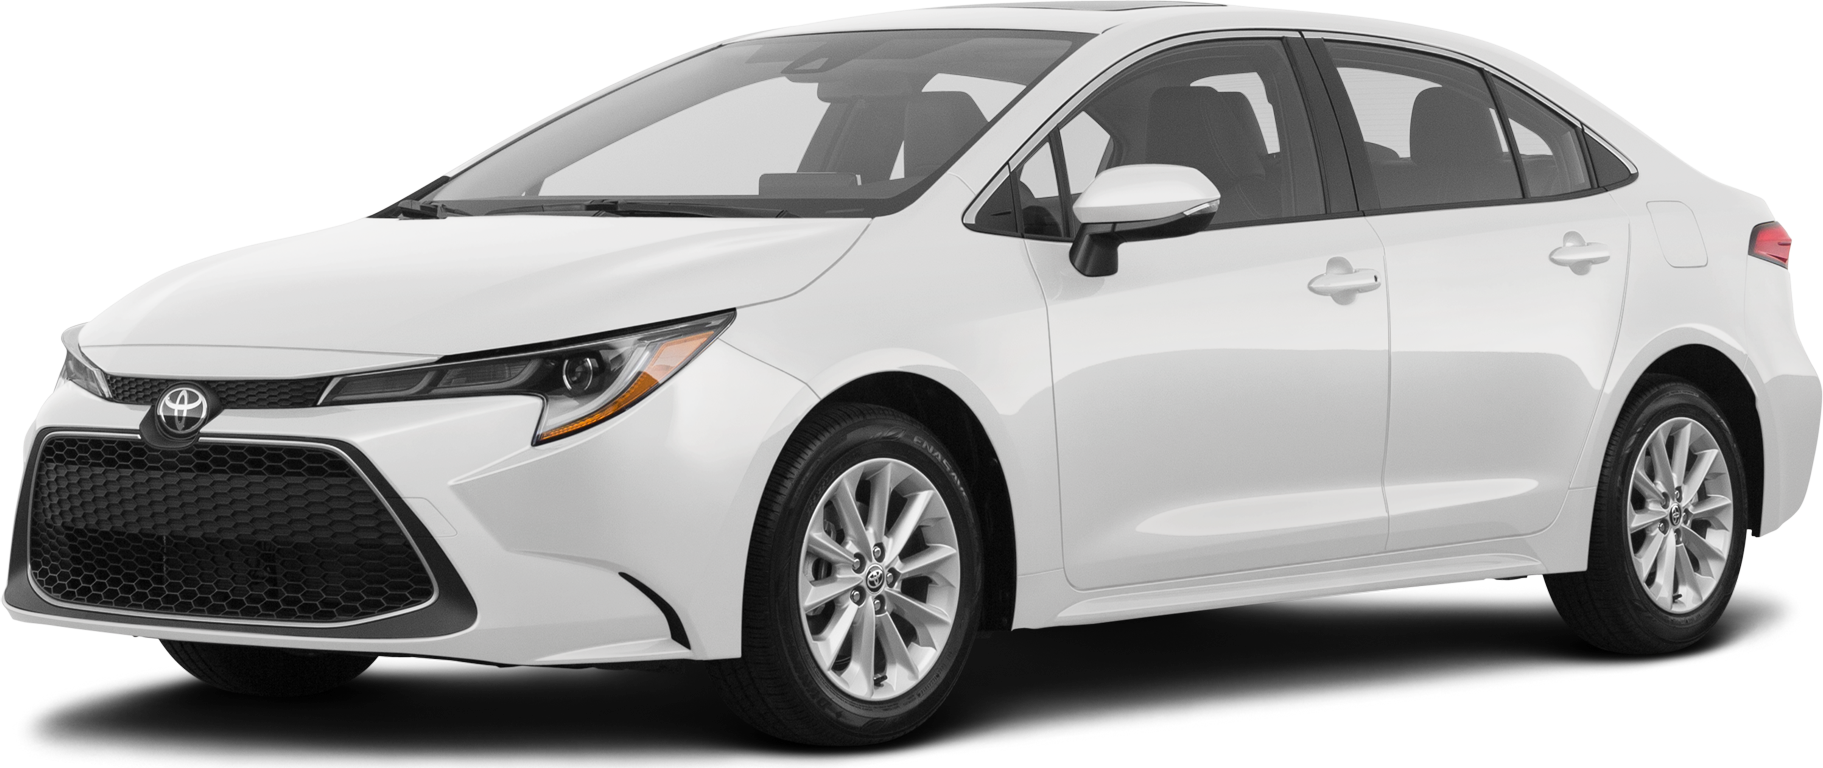 21 Toyota Corolla Reviews Pricing Specs Kelley Blue Book